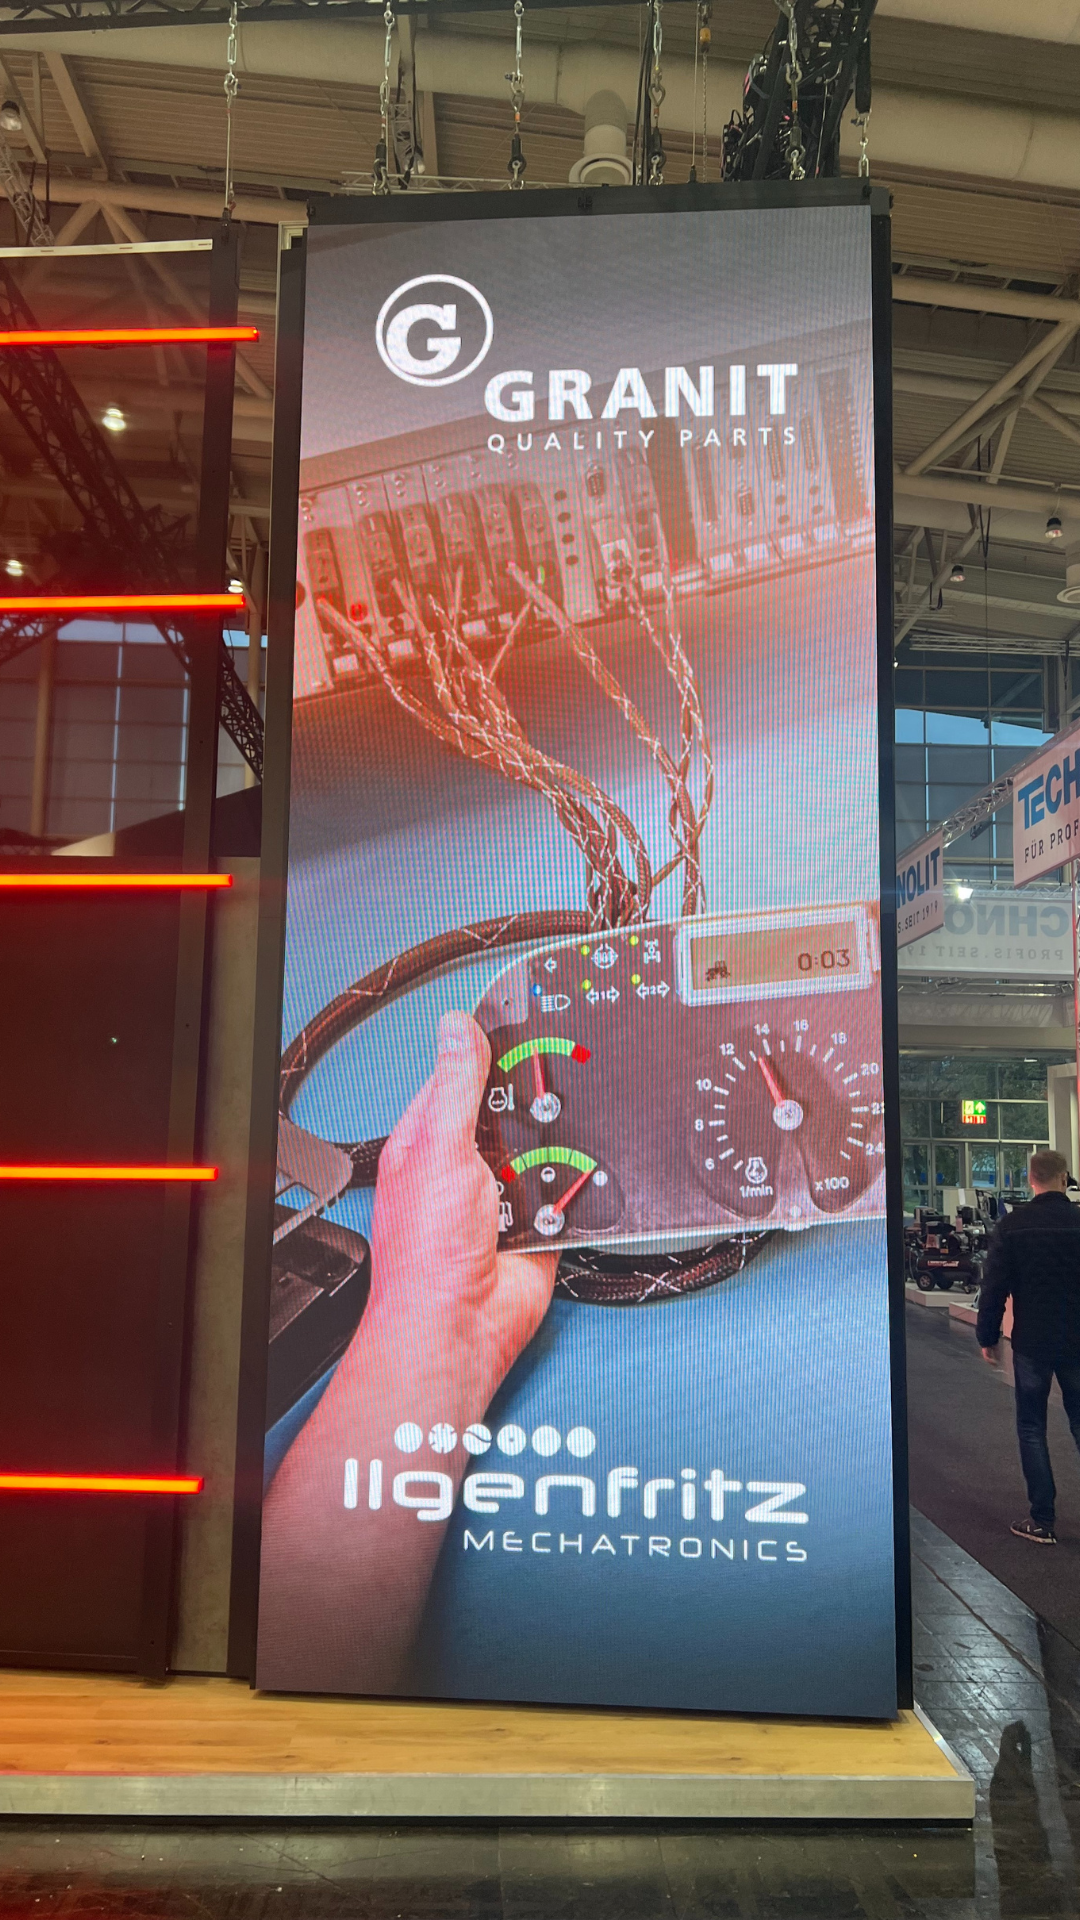 Advertising banner from Ilgenfritz Mechatronics and Granit Parts at Agritechnica